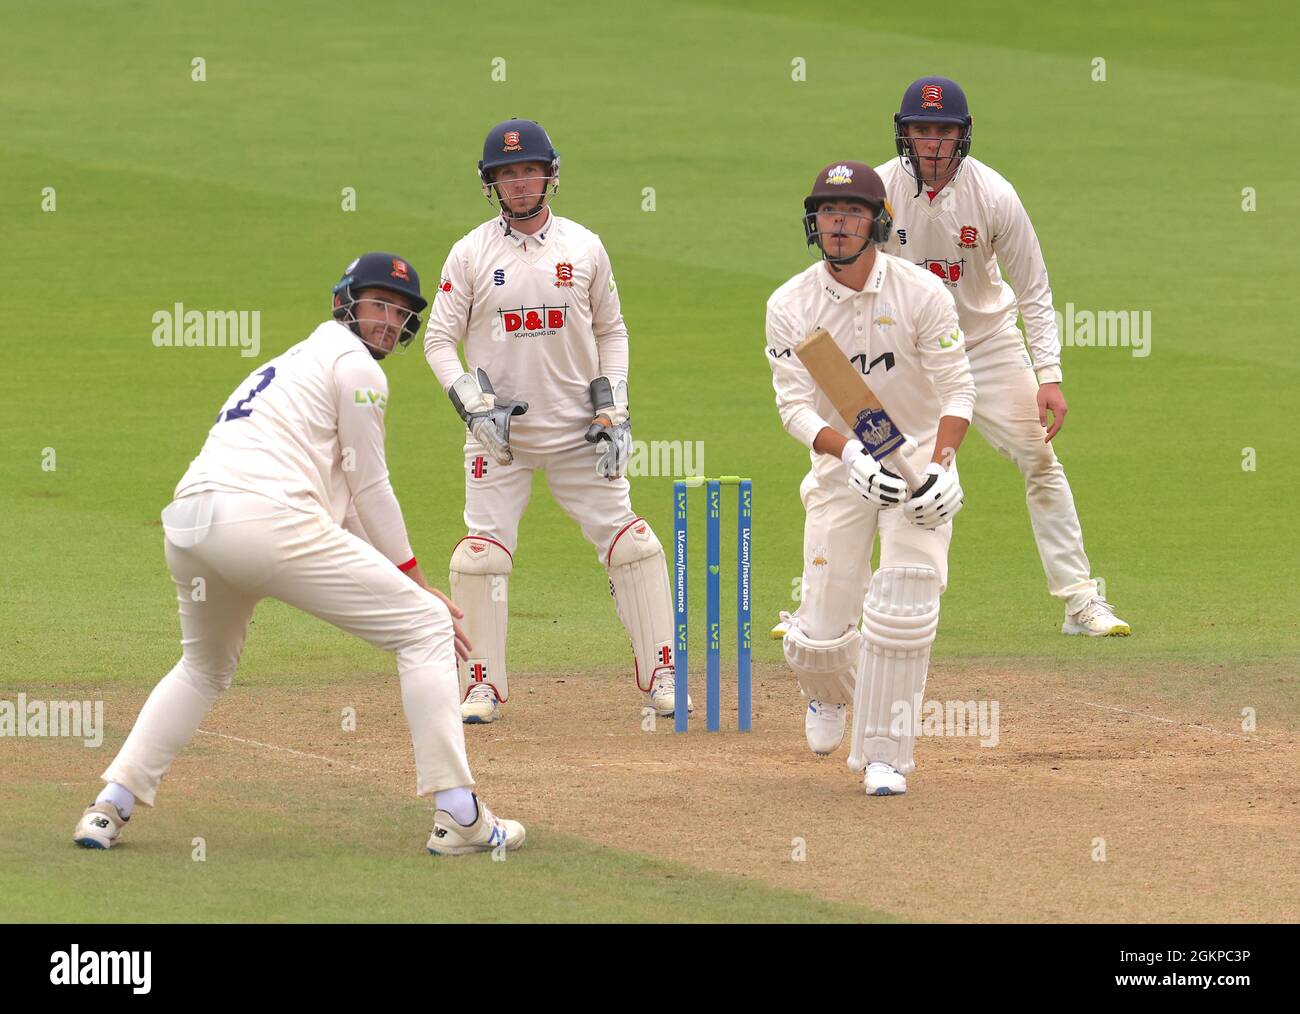 15 September, 2021. London, UK. Surrey’s James Taylor batting as Surrey take on Essex in the County Championship at the Kia Oval, day three David Rowe/Alamy Live News Stock Photo